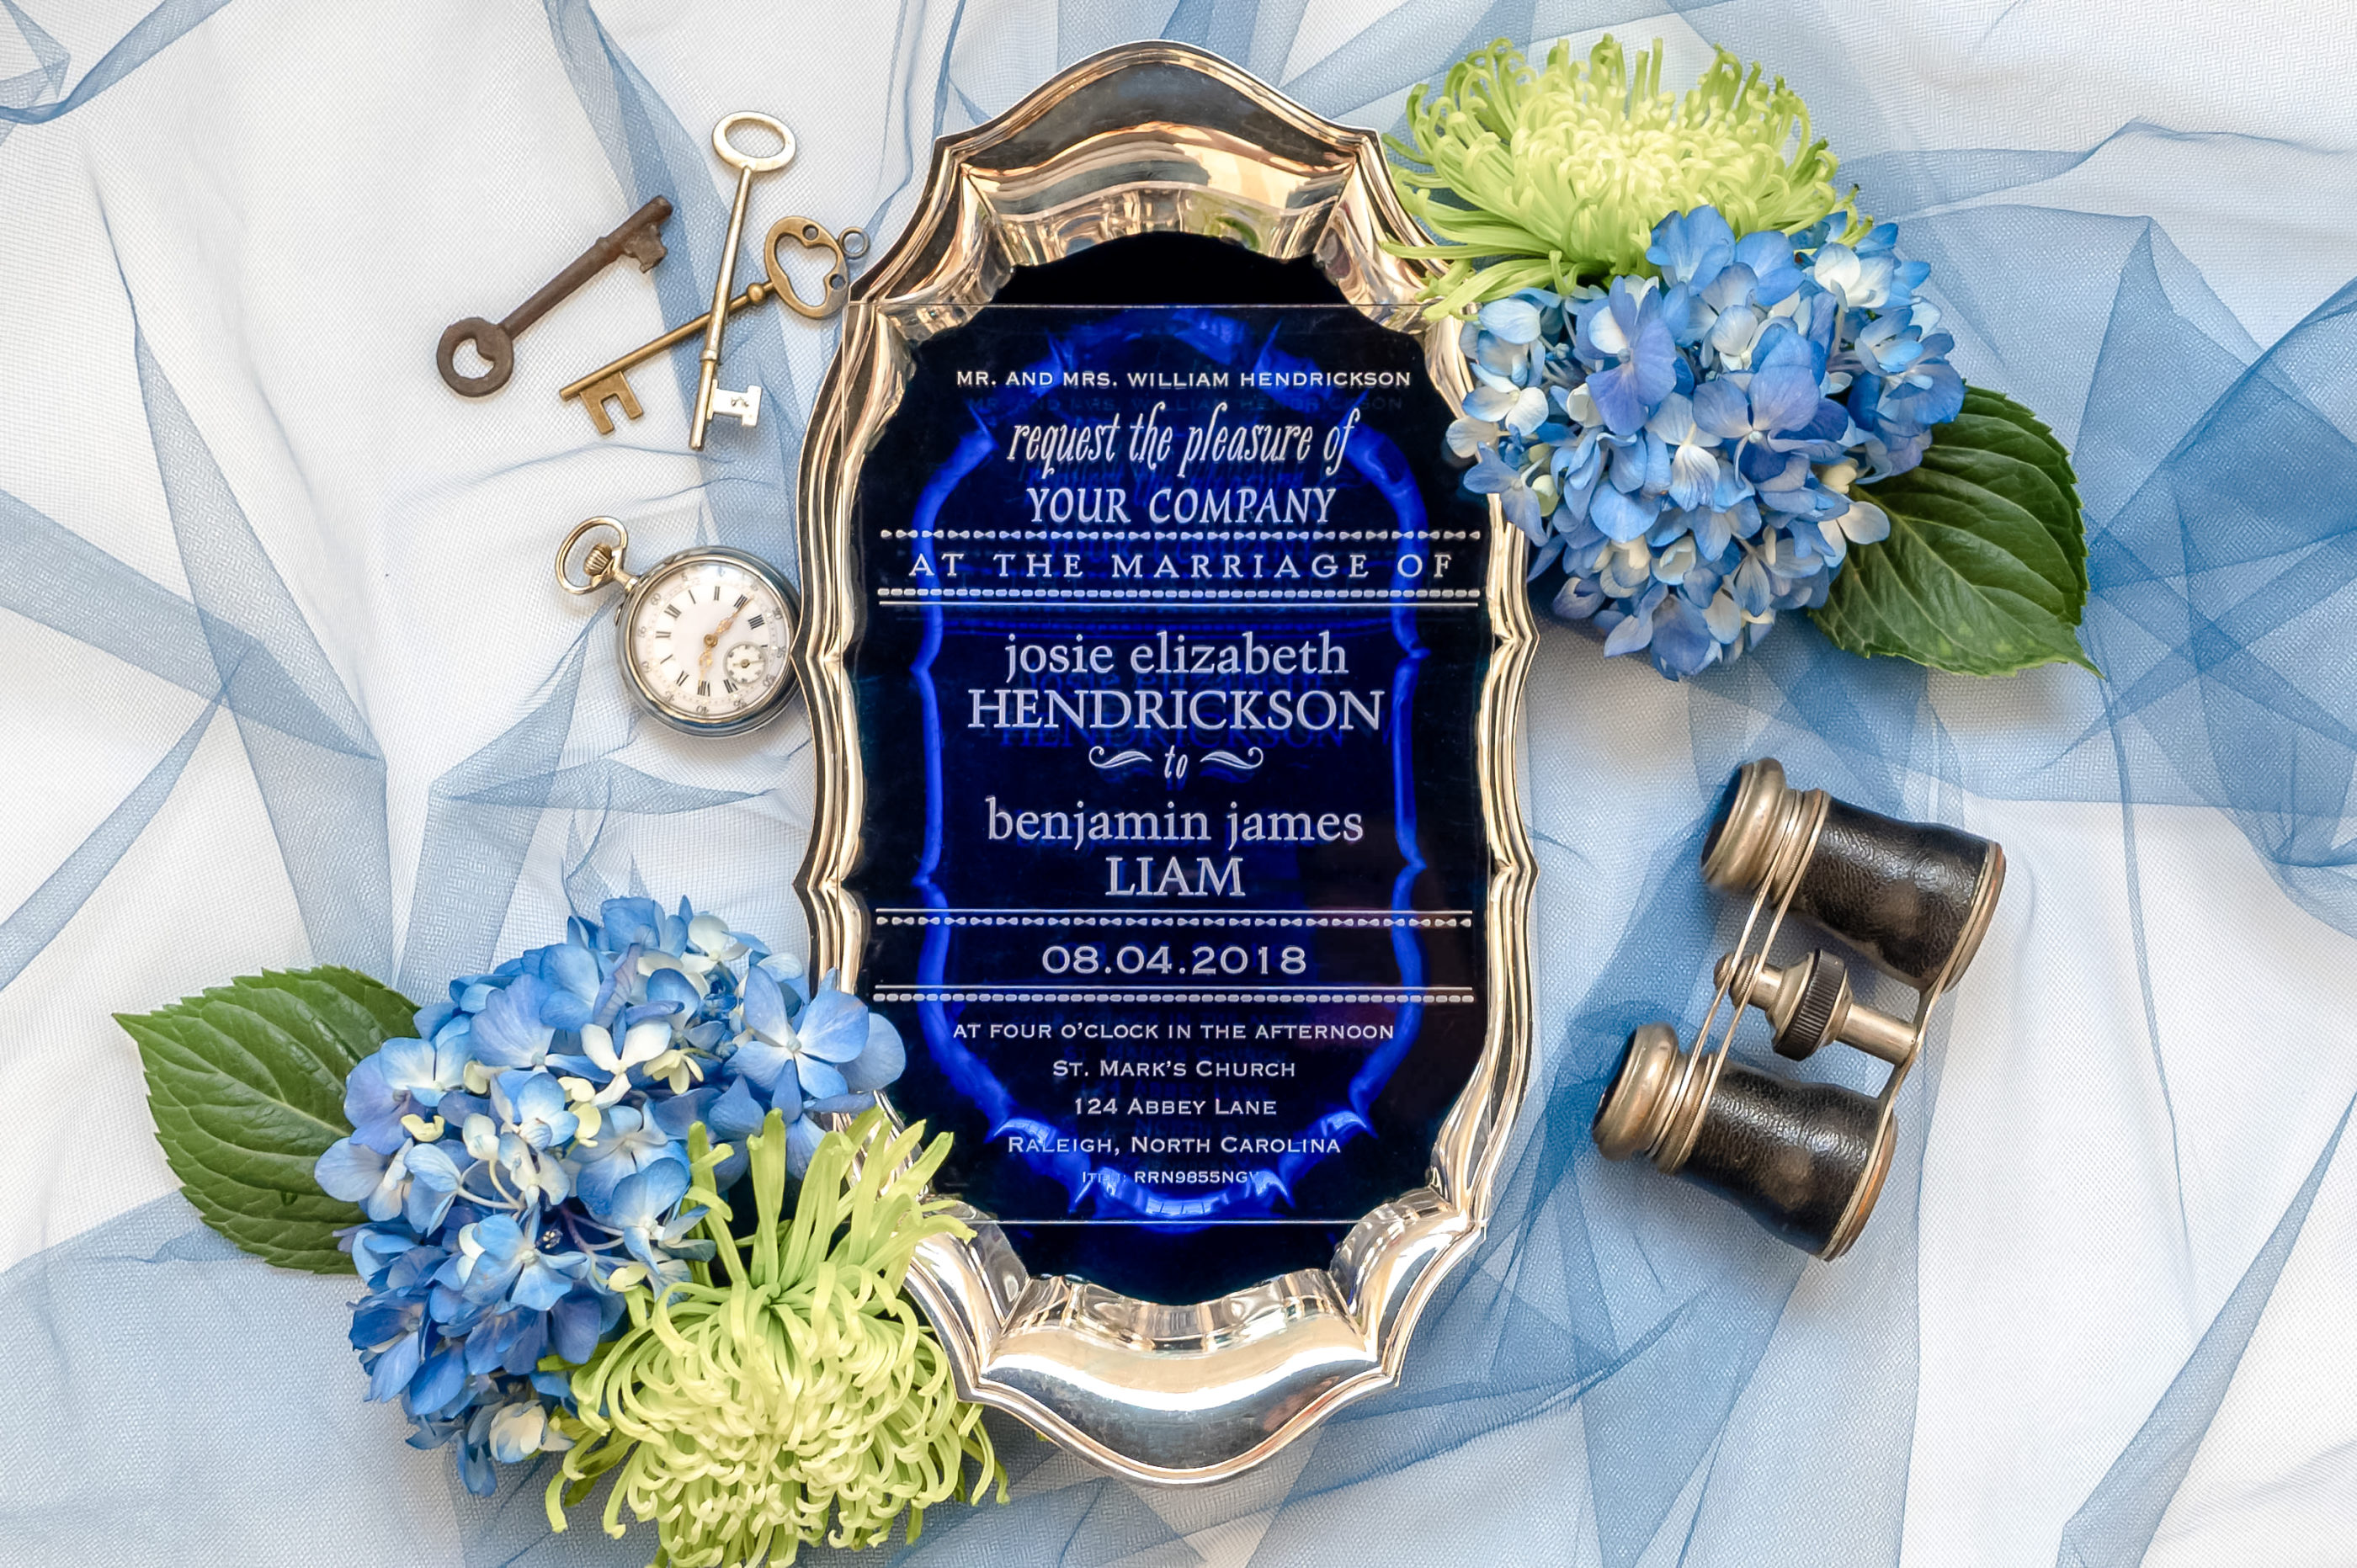 clear acrylic invitation with white writing photographed on dark blue background